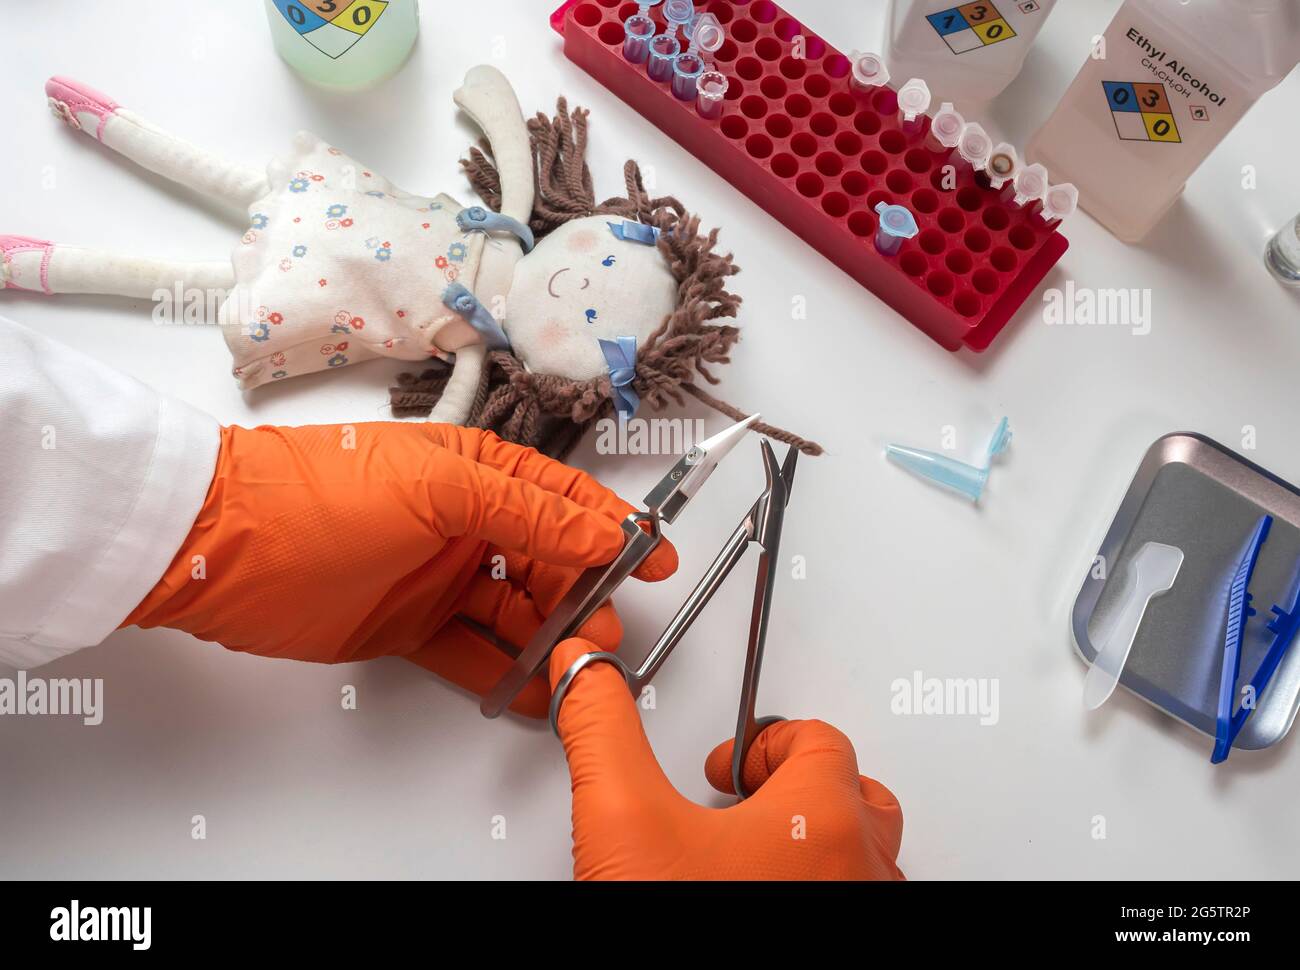 Forensic police extract hair from rag doll implicated in murder at crime lab for DNA analysis, concept image Stock Photo